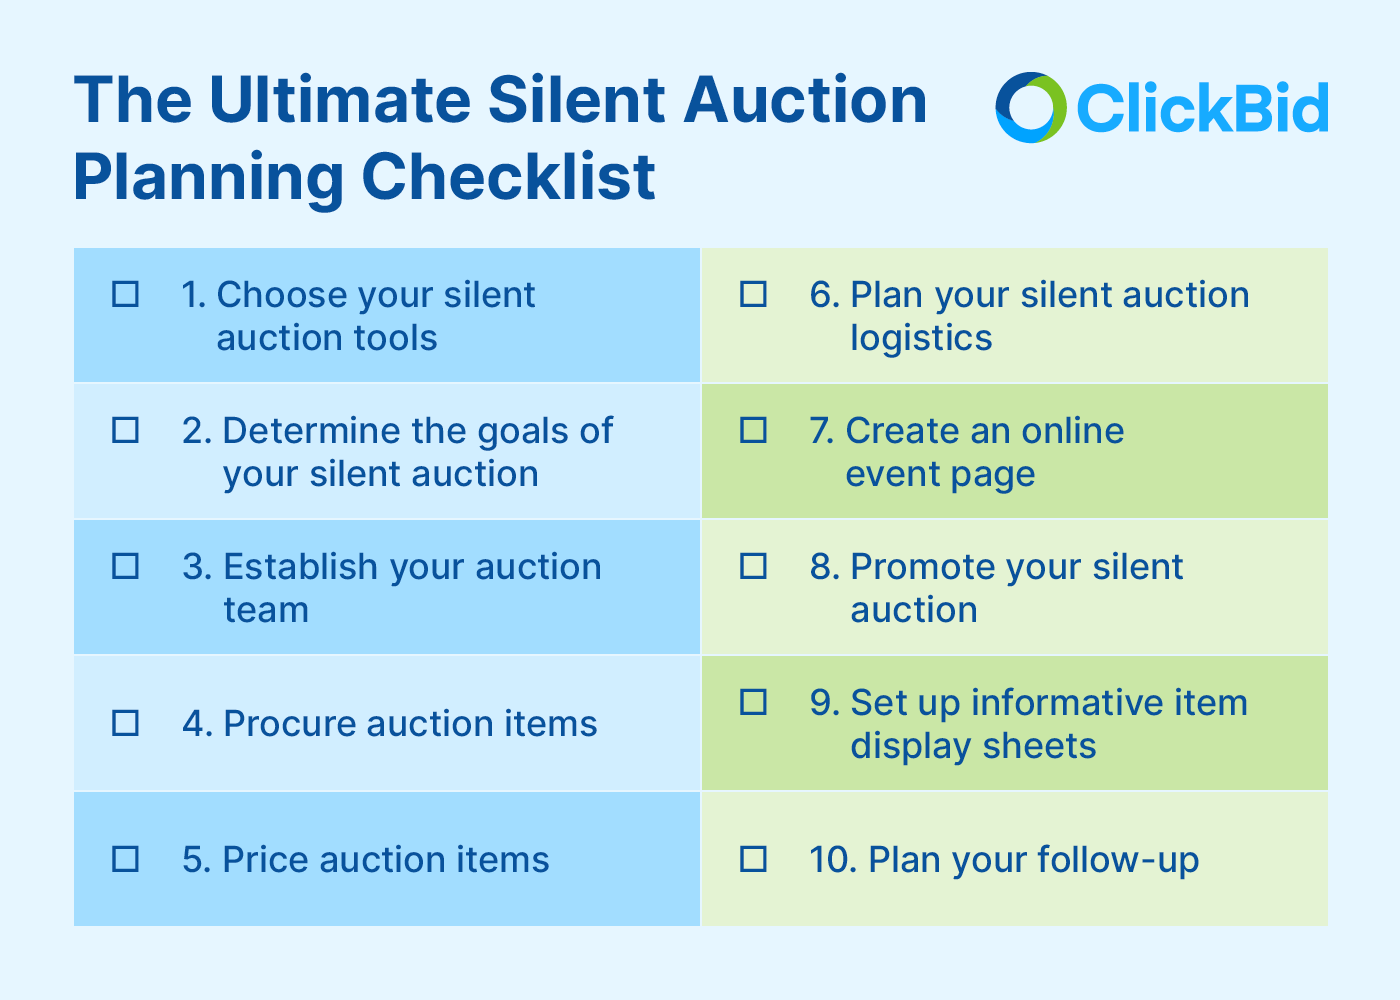 Ten steps nonprofits should follow to plan a silent auction, which are explained in the text below.